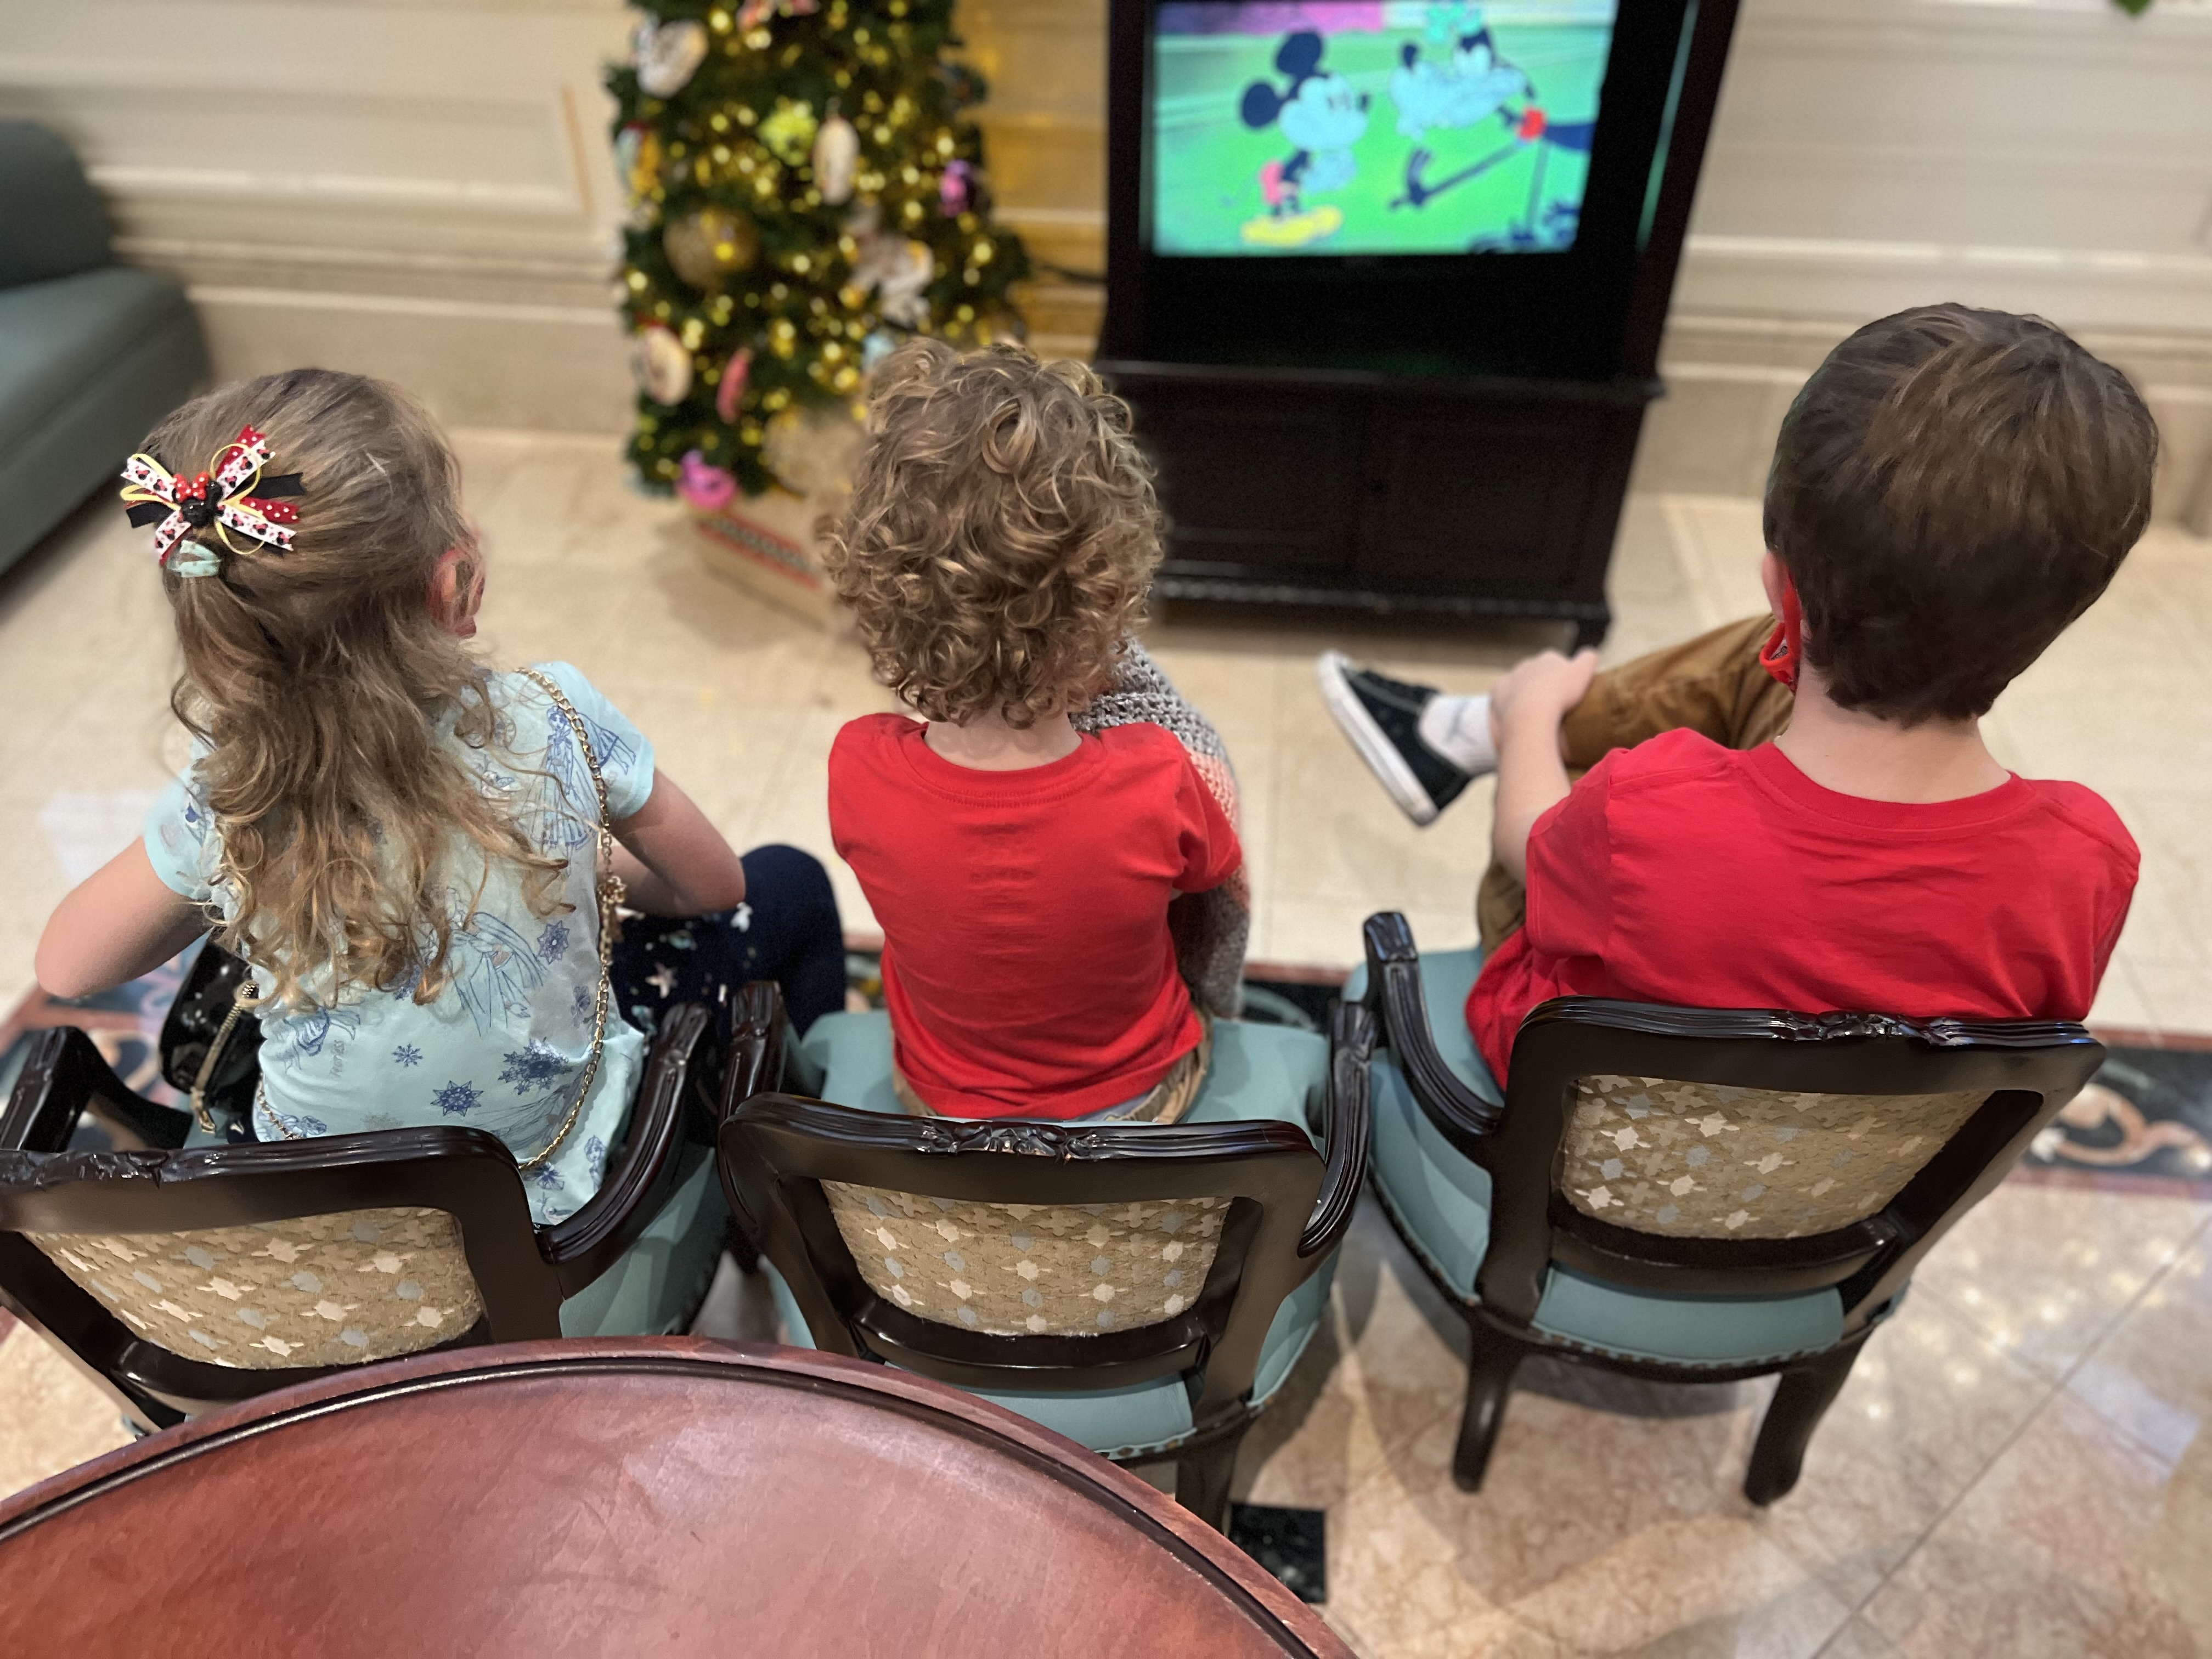 Grand Floridian Children's television area